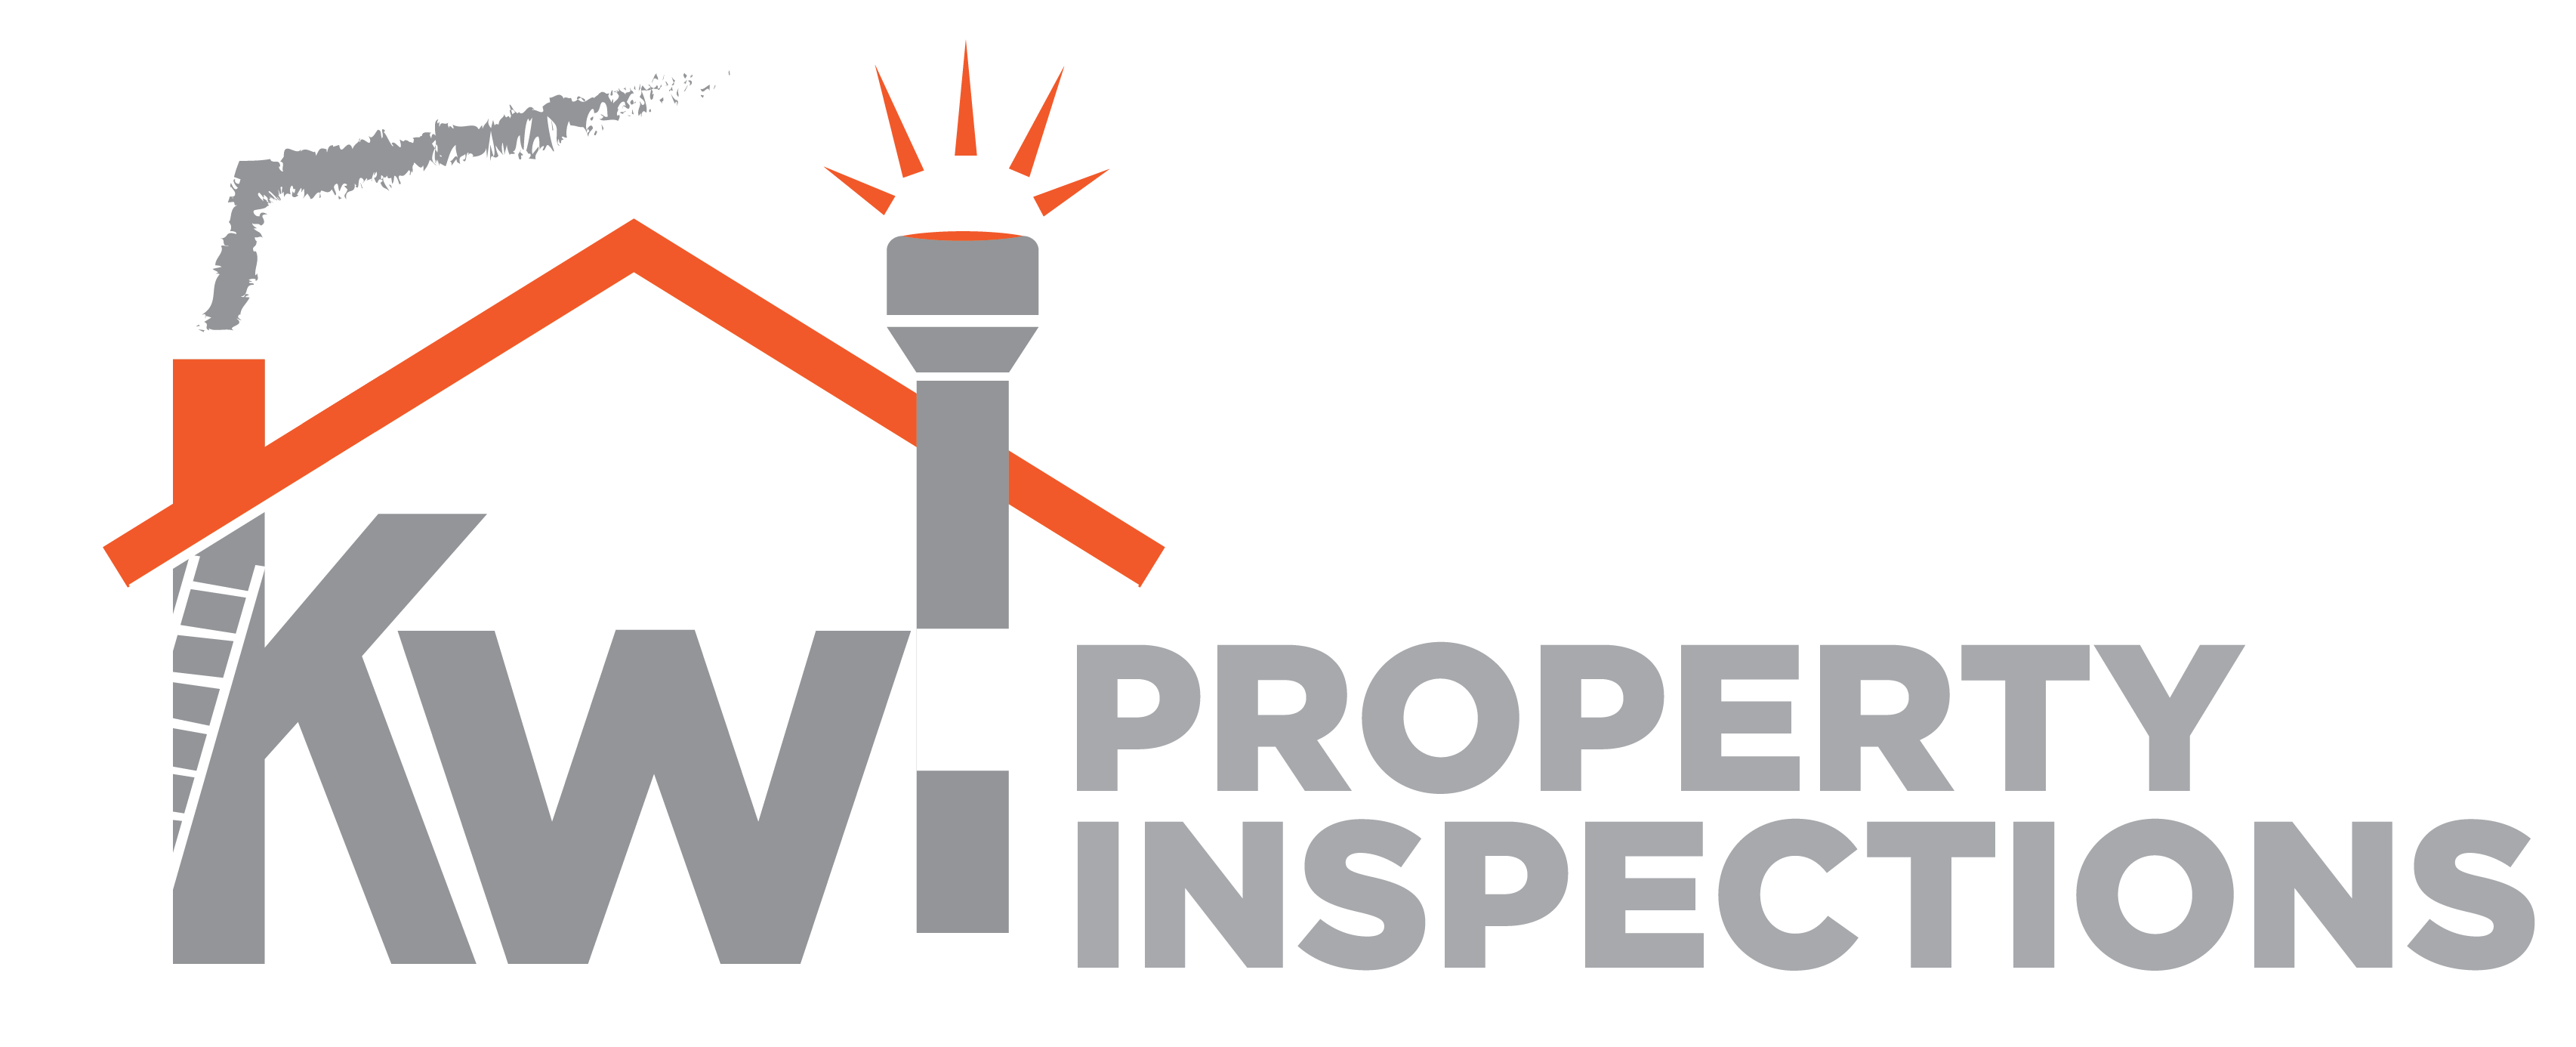 KW Property Inspections